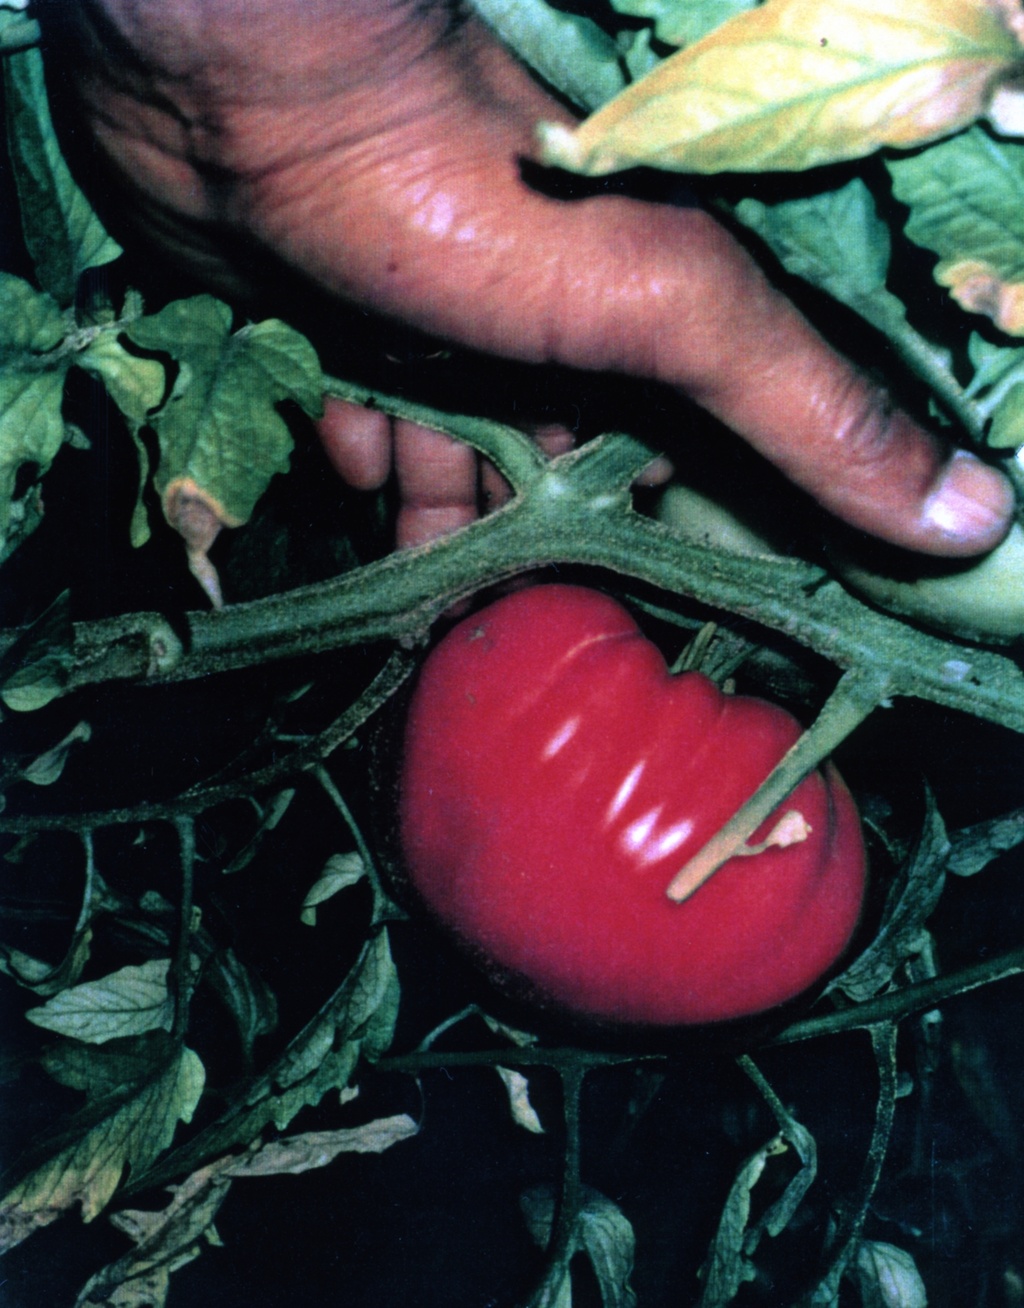 Image of a ripe red tomato nestled between green vines and leaves. A human hand cups the tomato through the greenery.&nbsp;